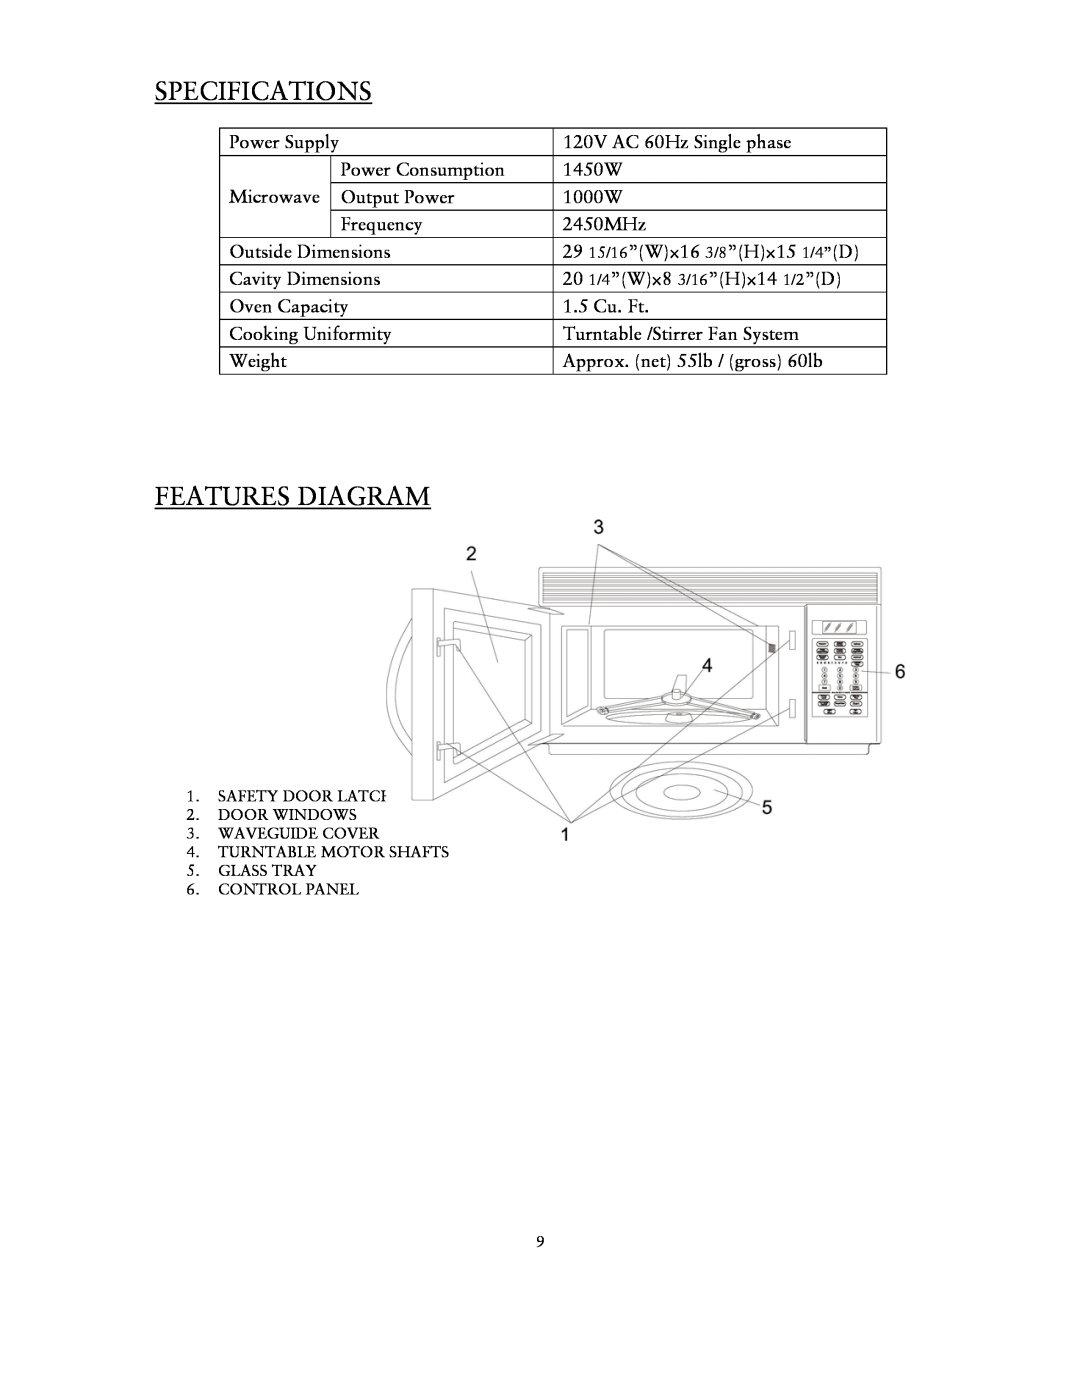 Sunbeam SNM1501RAX user manual Specifications, Features Diagram 